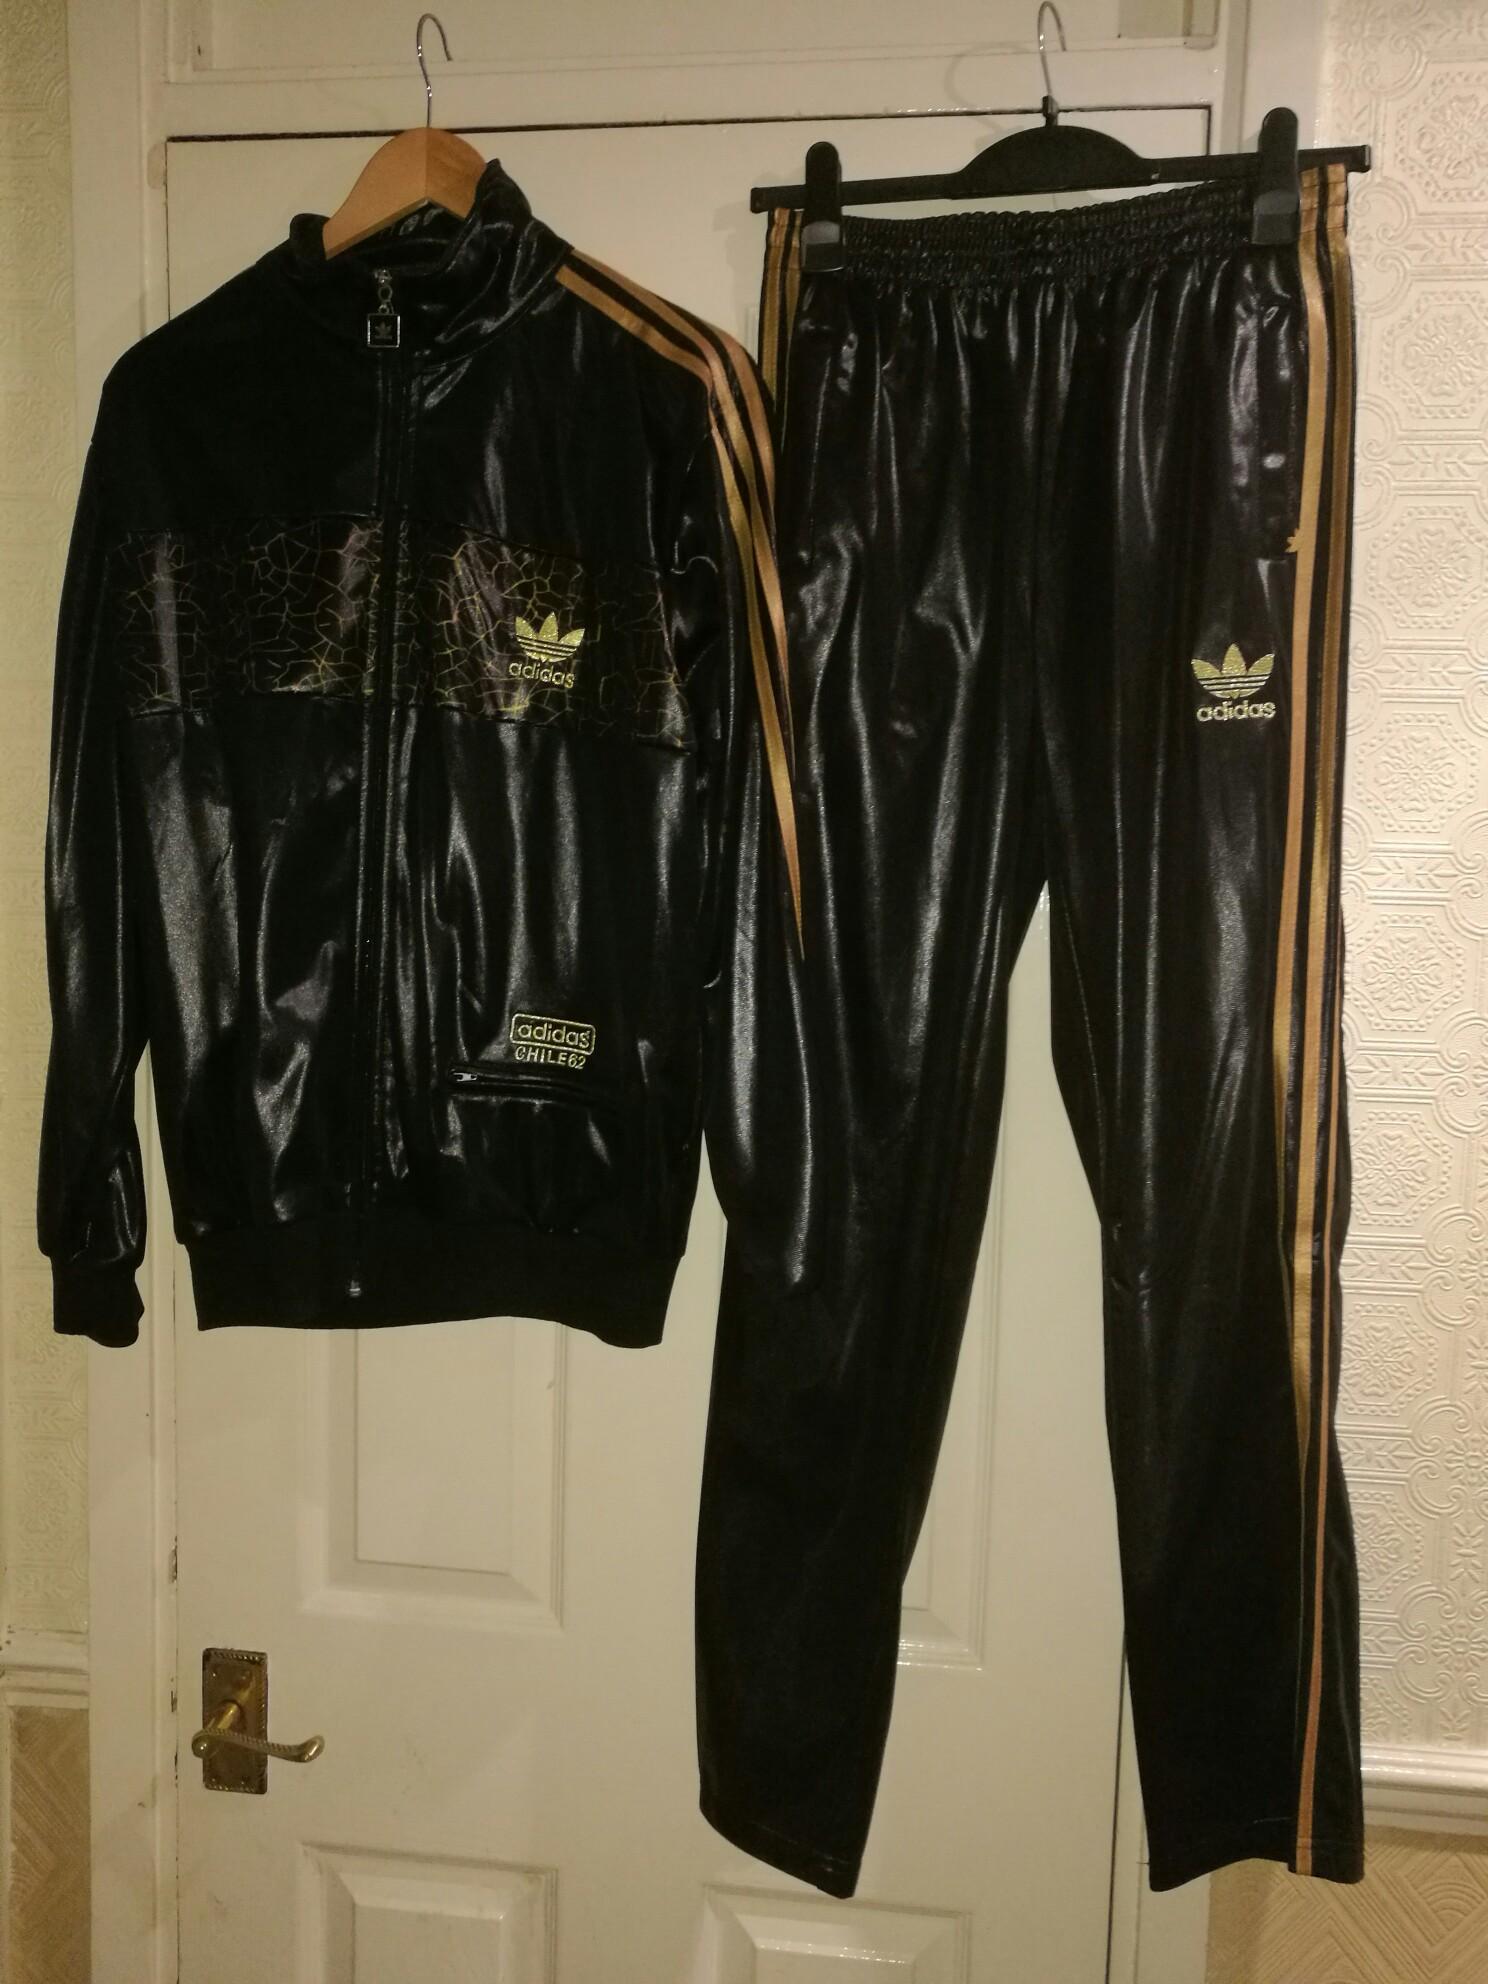 black and gold adidas sweatsuit